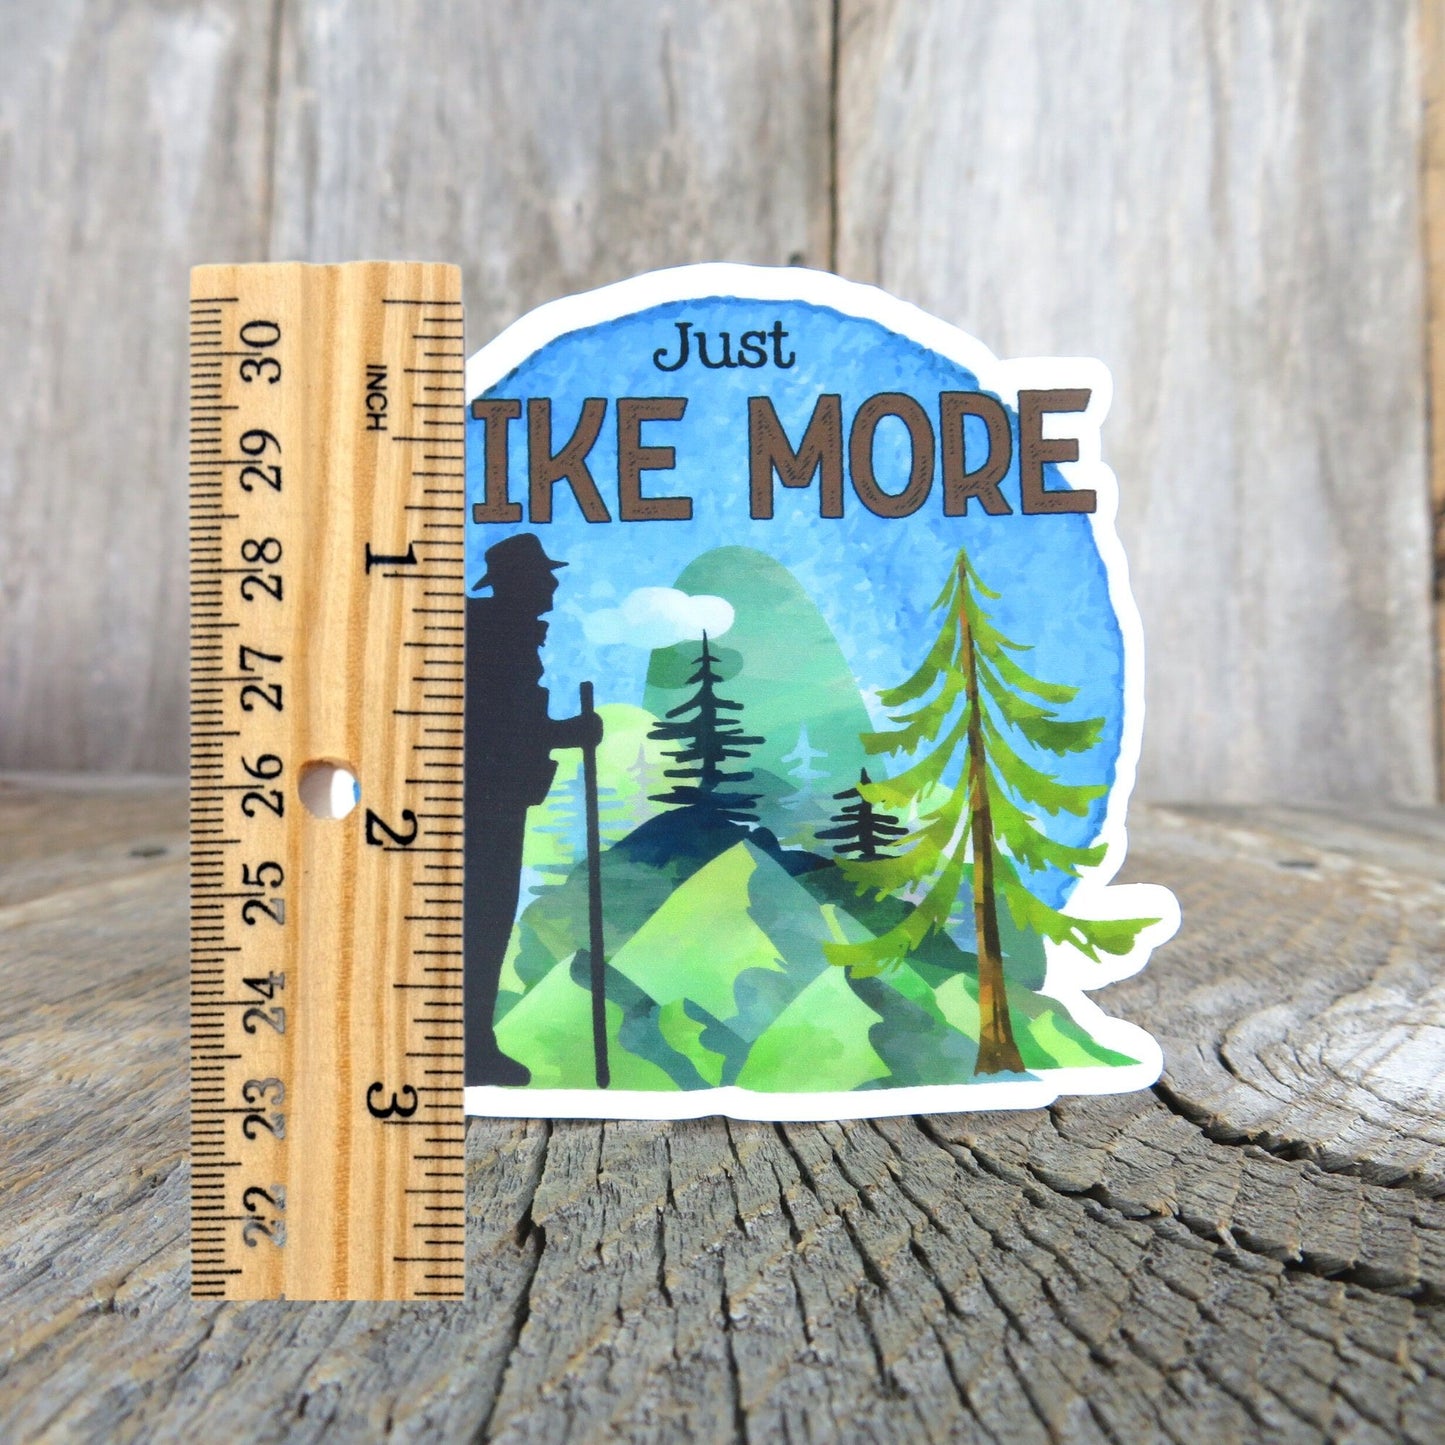 Just One More Hike Sticker Hiking Lover Waterproof Sticker Outdoors Backpacking